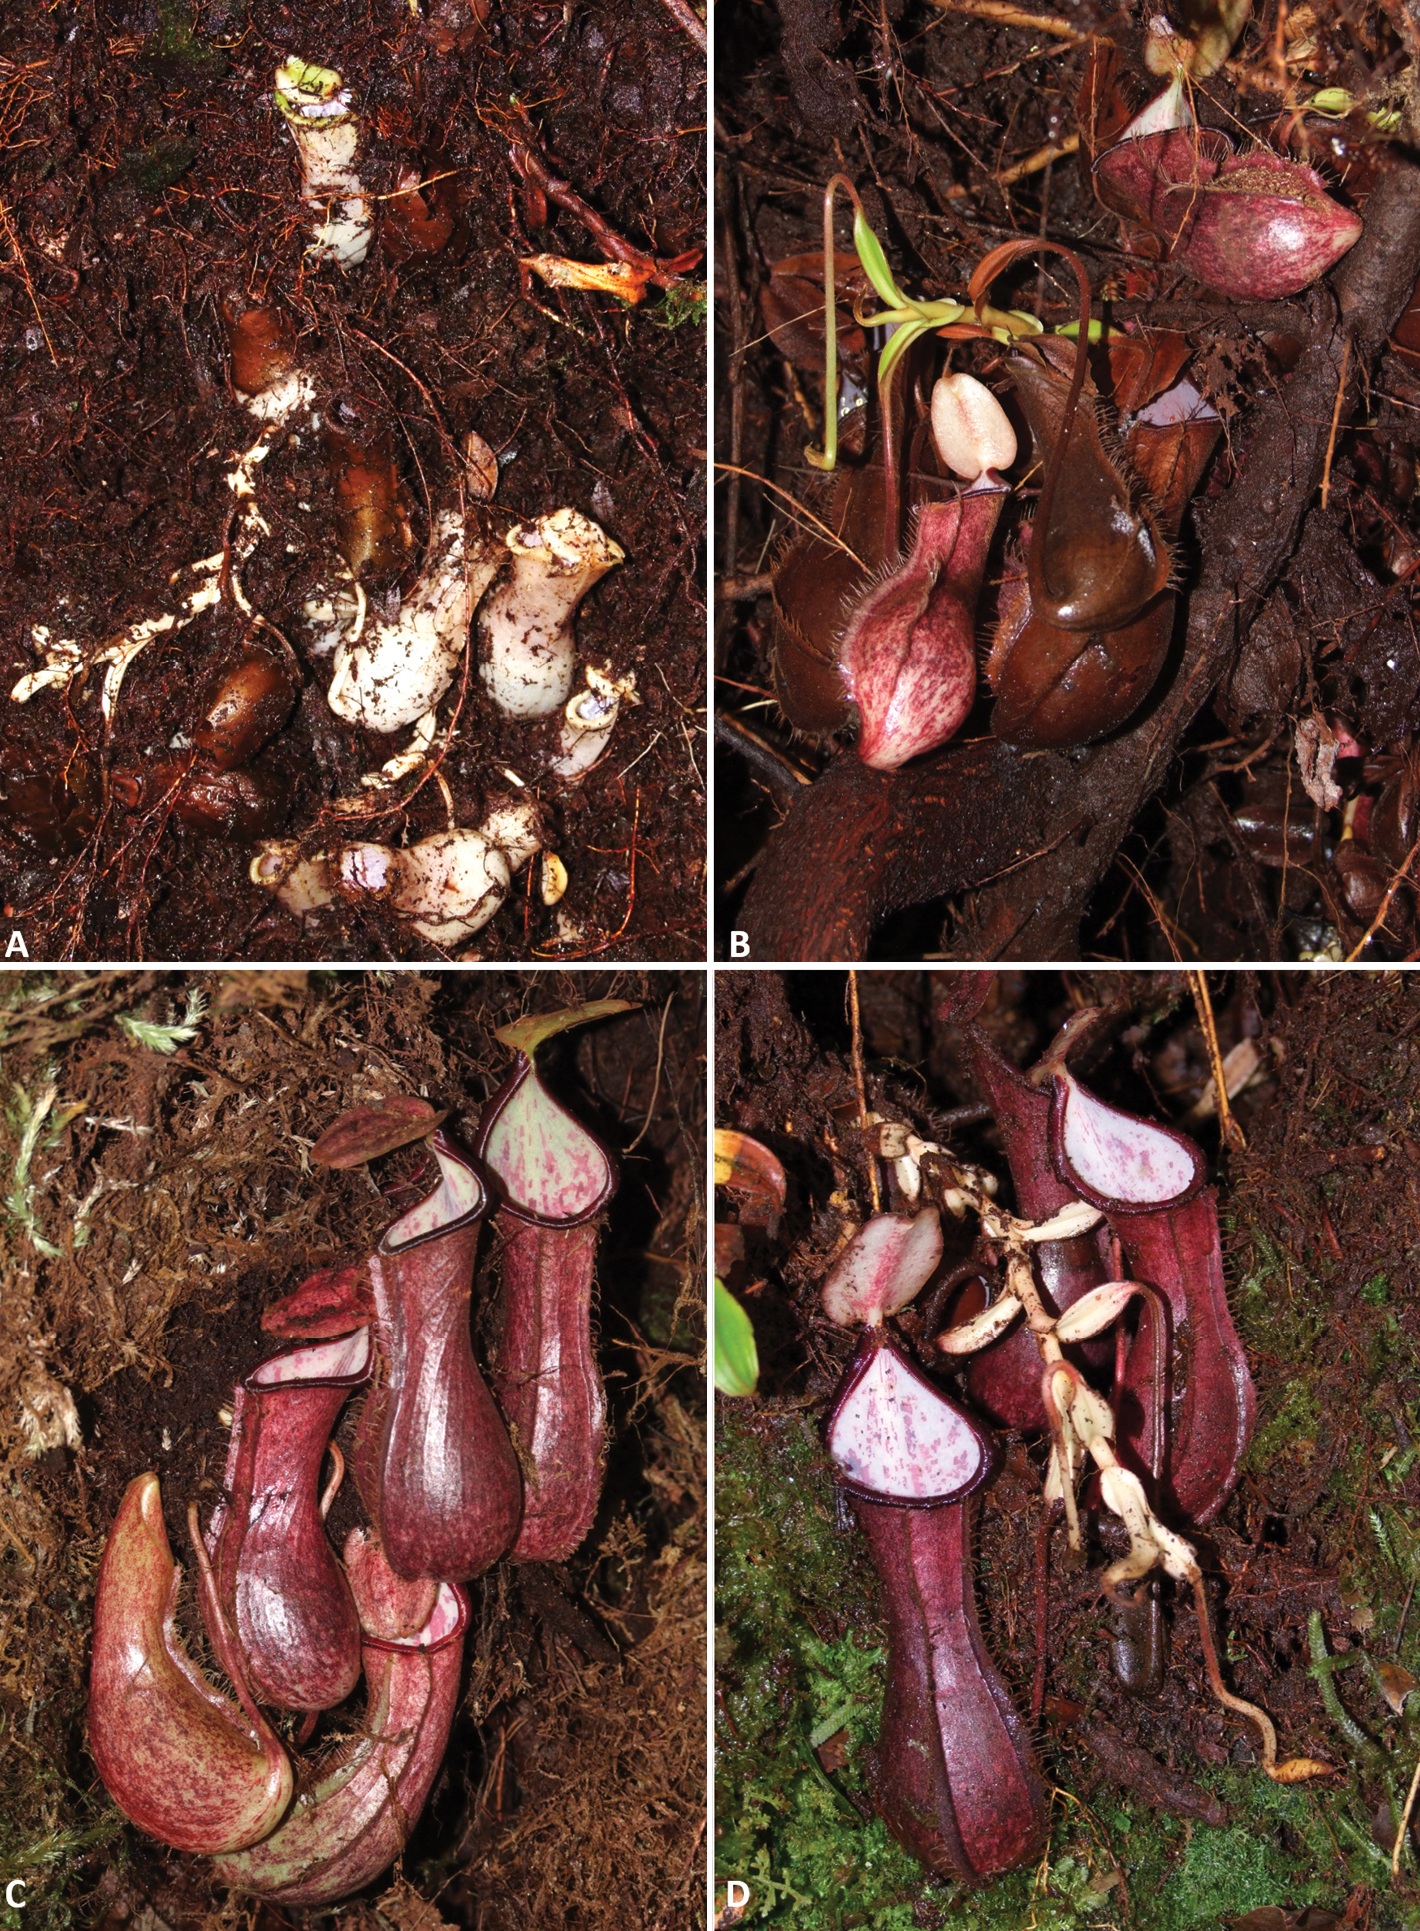 Species New to Science: [Botany • 2022] Nepenthes pudica (Nepenthaceae) First Record of Functional Underground Traps in A Pitcher Plant: A New Species from North Kalimantan, Borneo